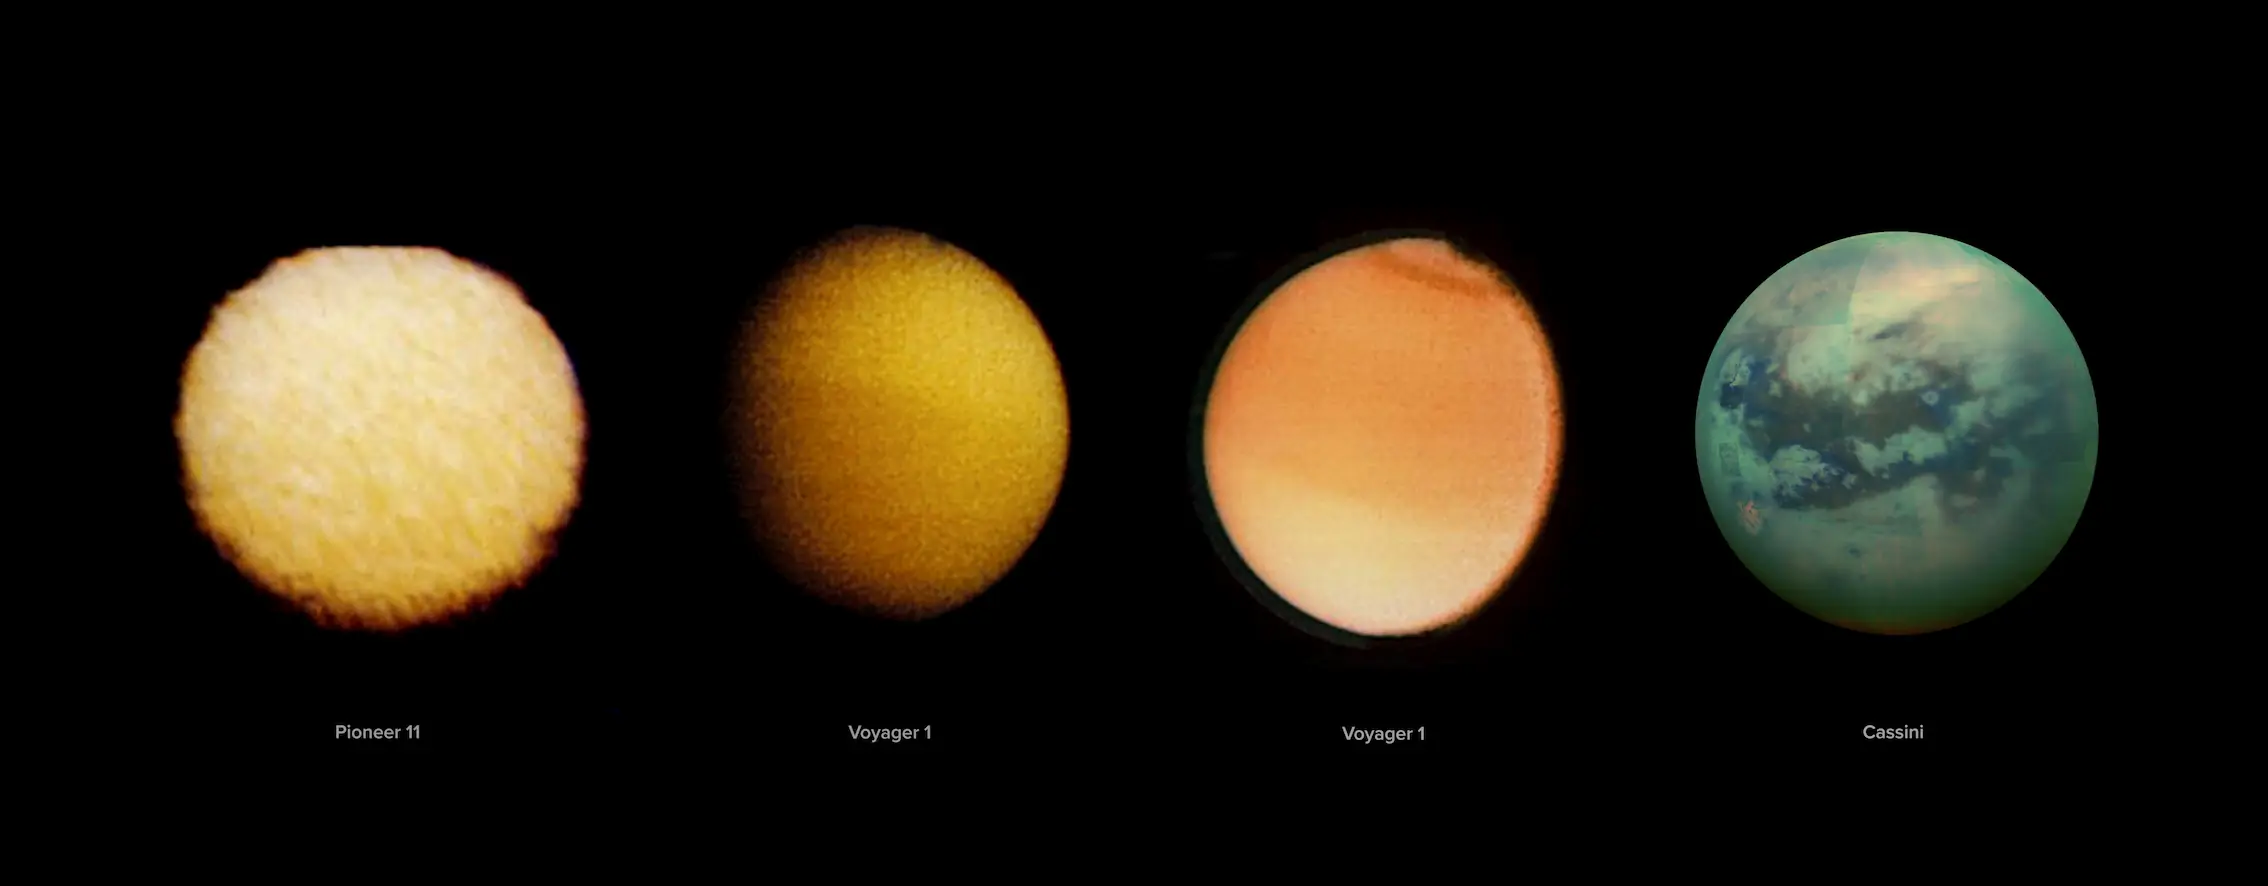 Images of Titan from Pioneer 11, Voyager 1, and Cassini